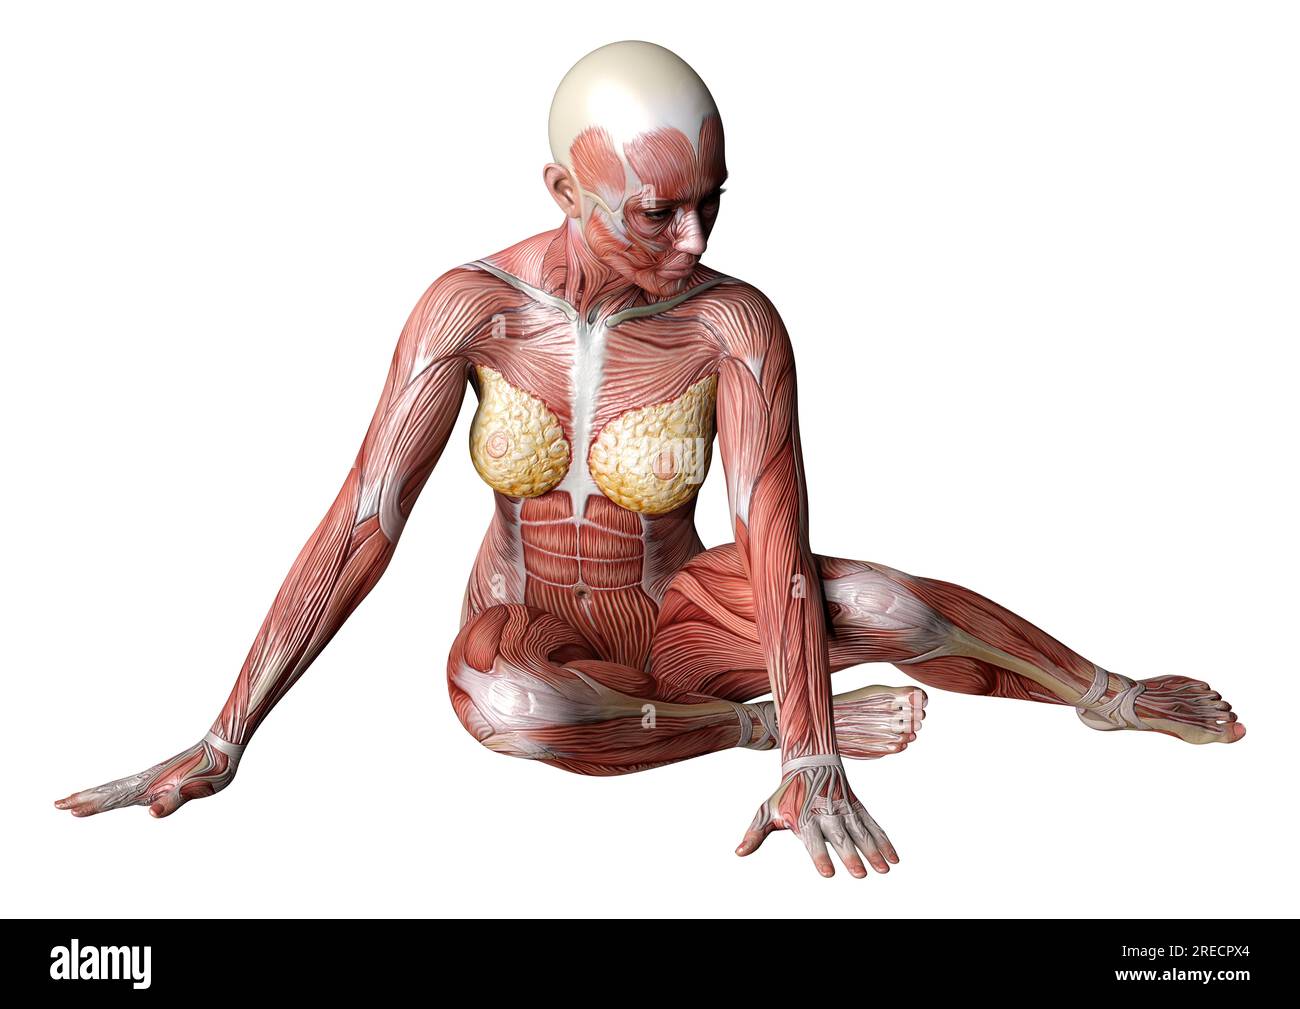 26,421 Muscle Anatomy Female Images, Stock Photos, 3D objects